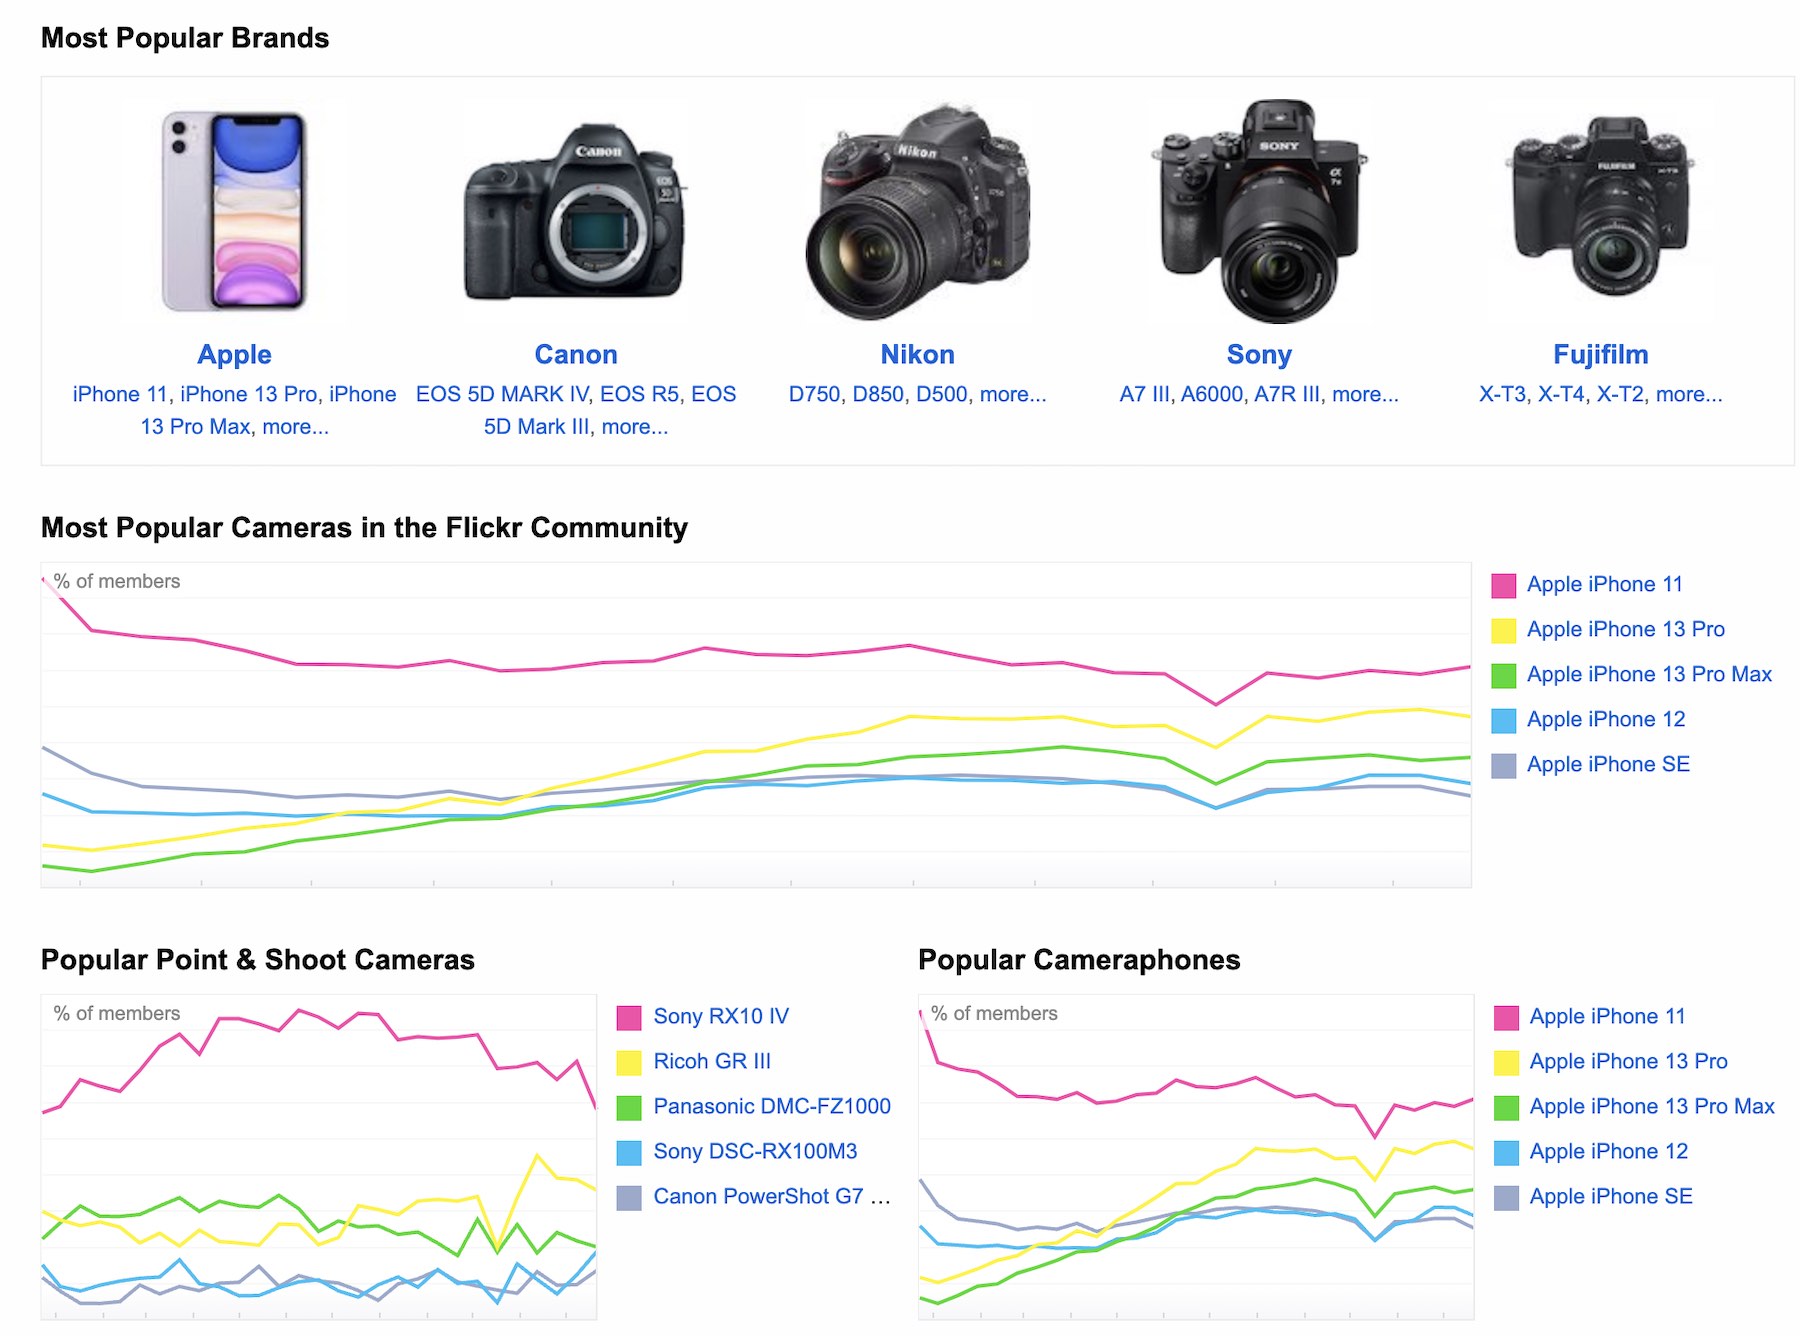 bibliotheek ruilen Maan The latest camera stats (Flickr most popular cameras, compact and vlog  camera trends, camera prices) - Photo Rumors